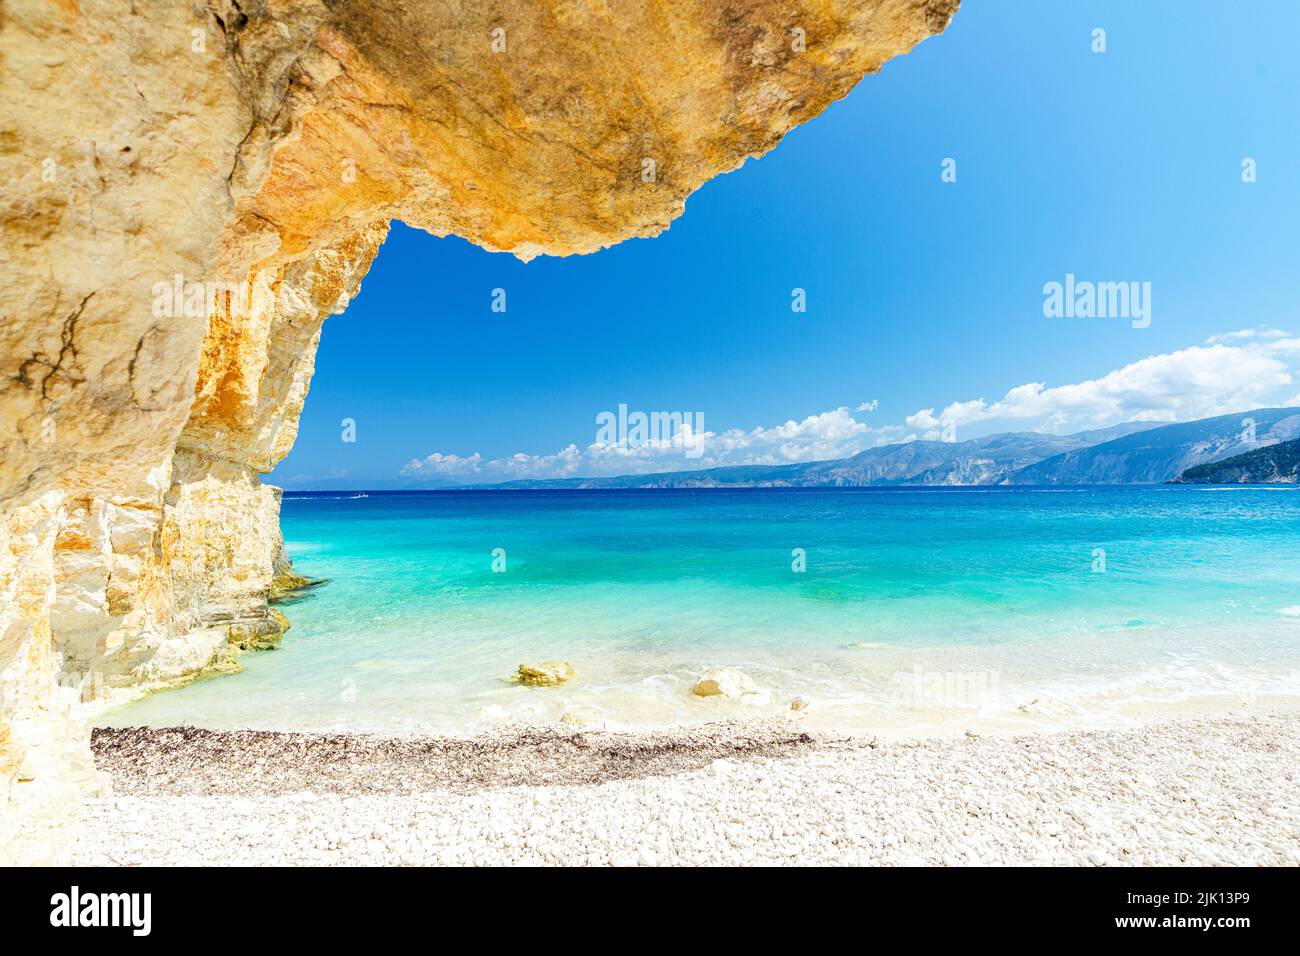 Crystal sea surrounded by limestone cliffs and white pebbles, Fteri Beach, Kefalonia, Ionian Islands, Greek Islands, Greece, Europe Stock Photo